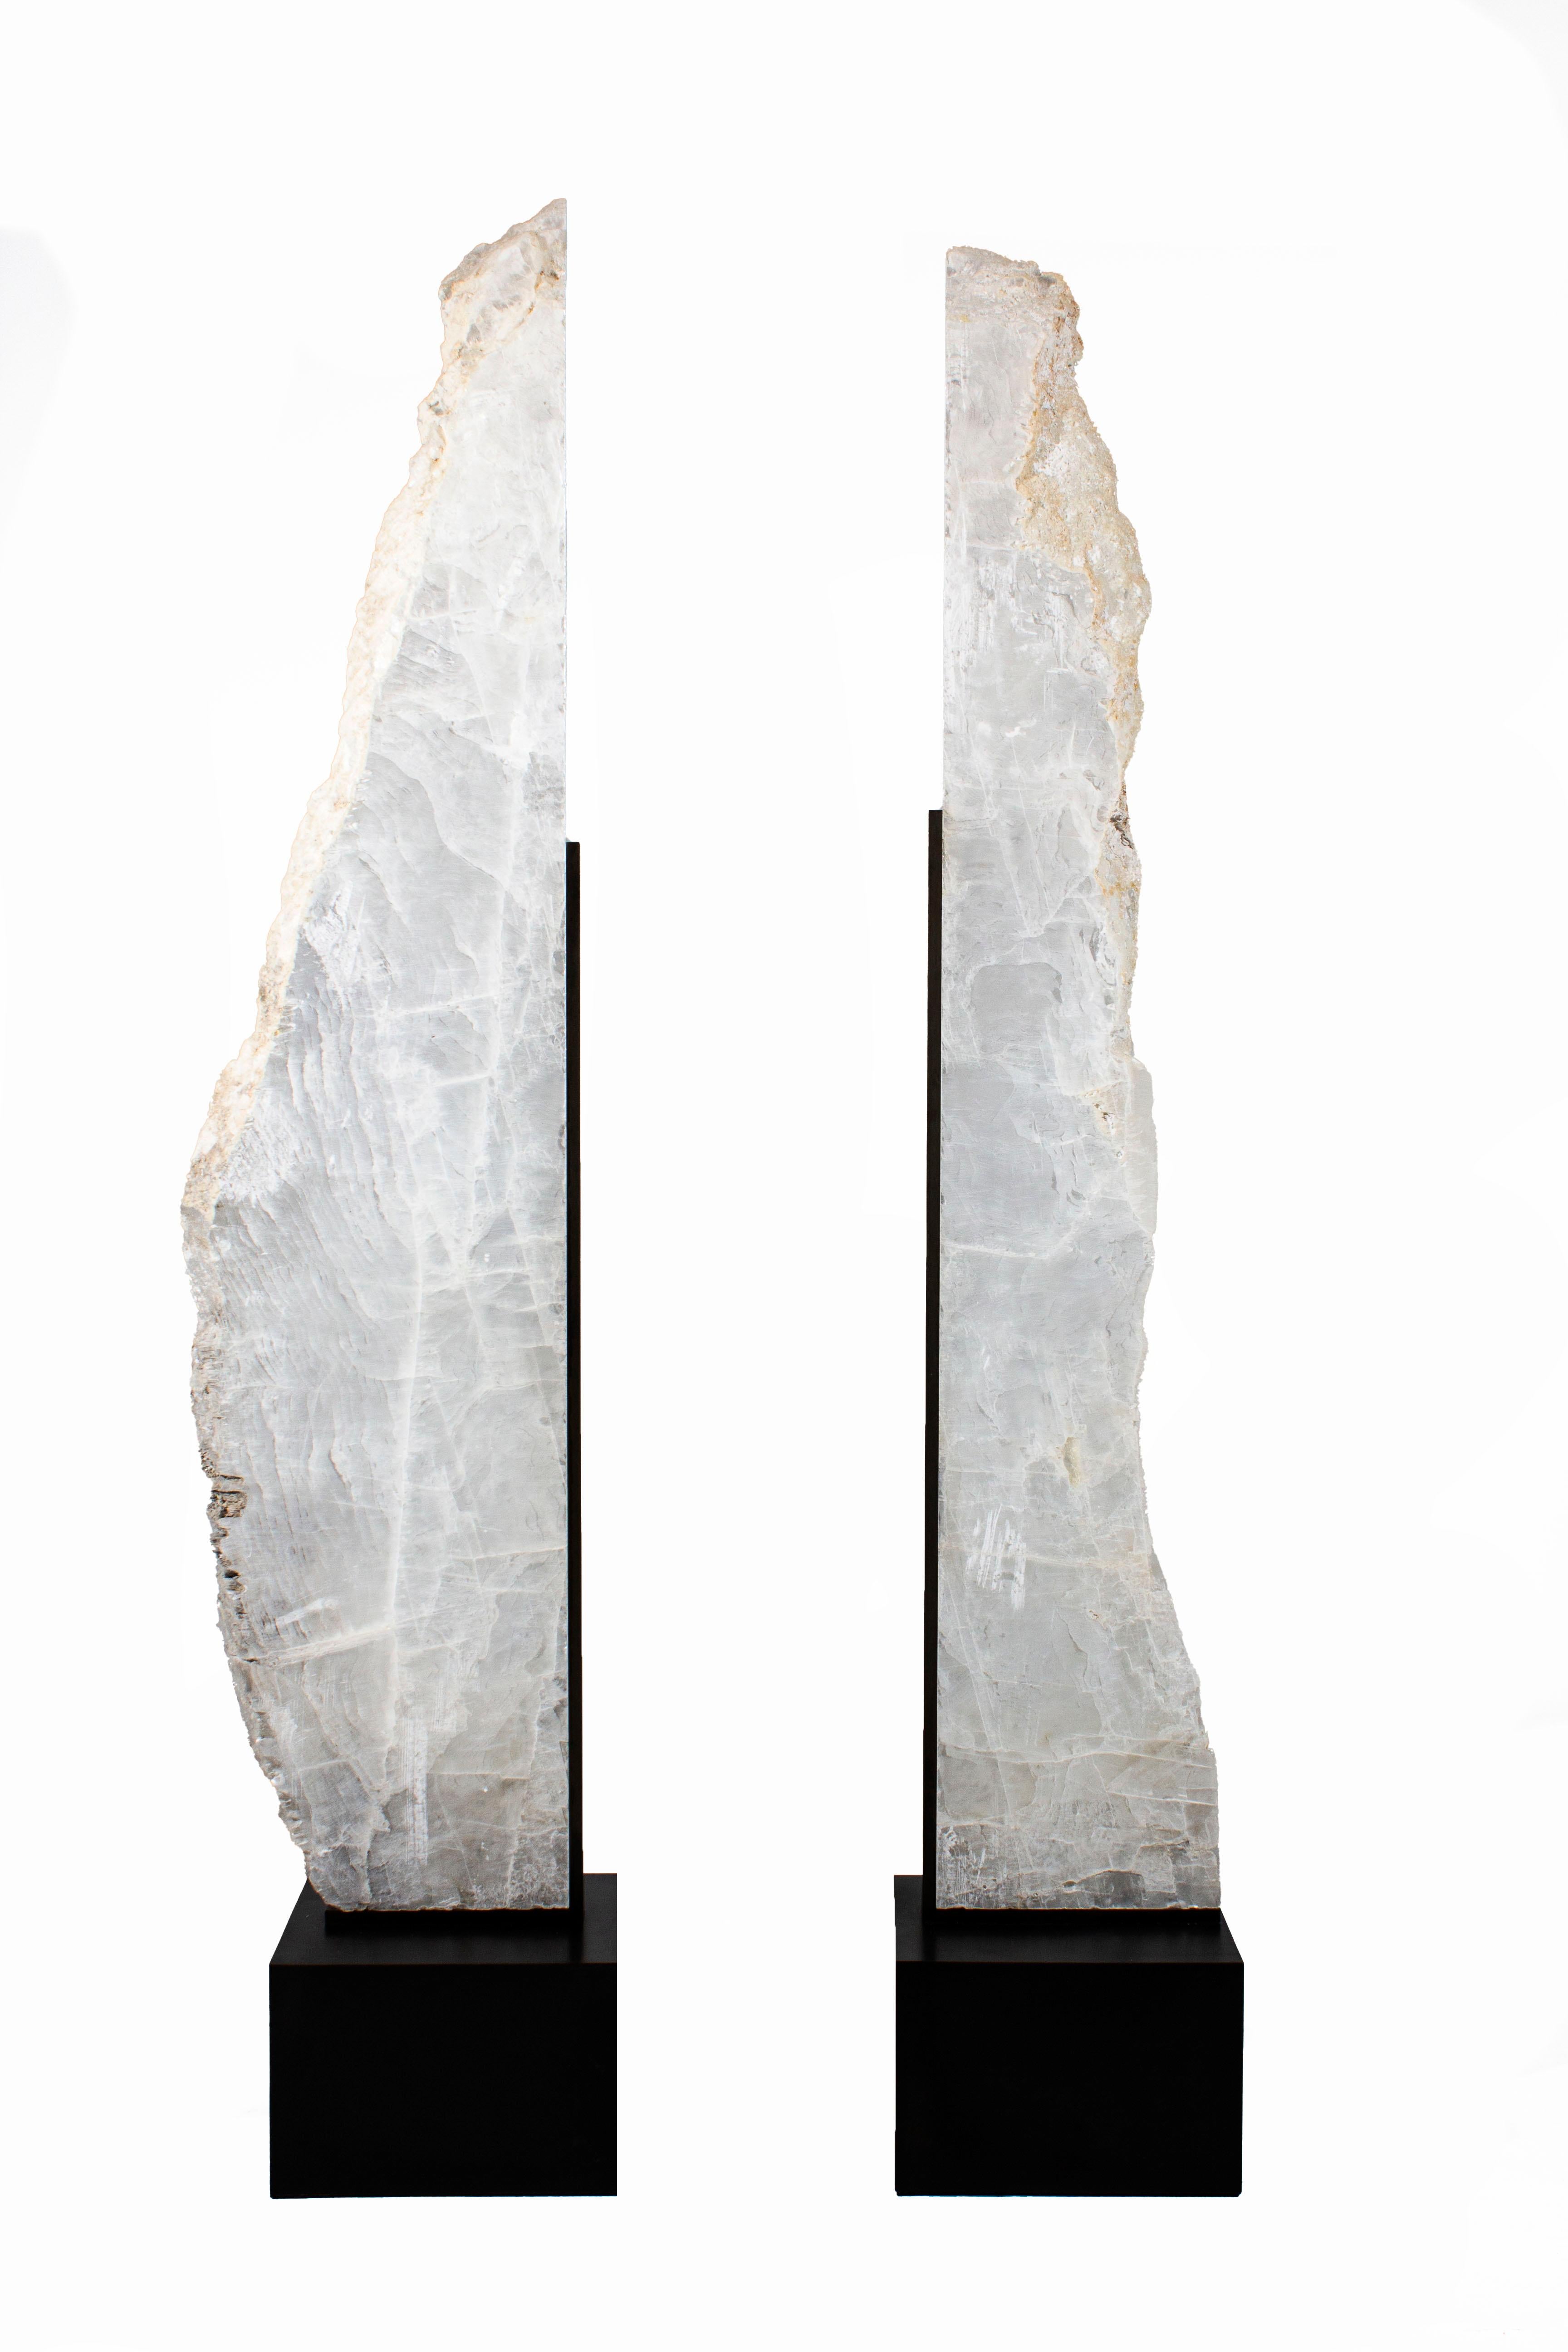 Towers sold separtely 

Selenite Tower on Museum Mount

Selenite Crystal from New Mexico then crafted in to a museum style tower sculpture piece.





